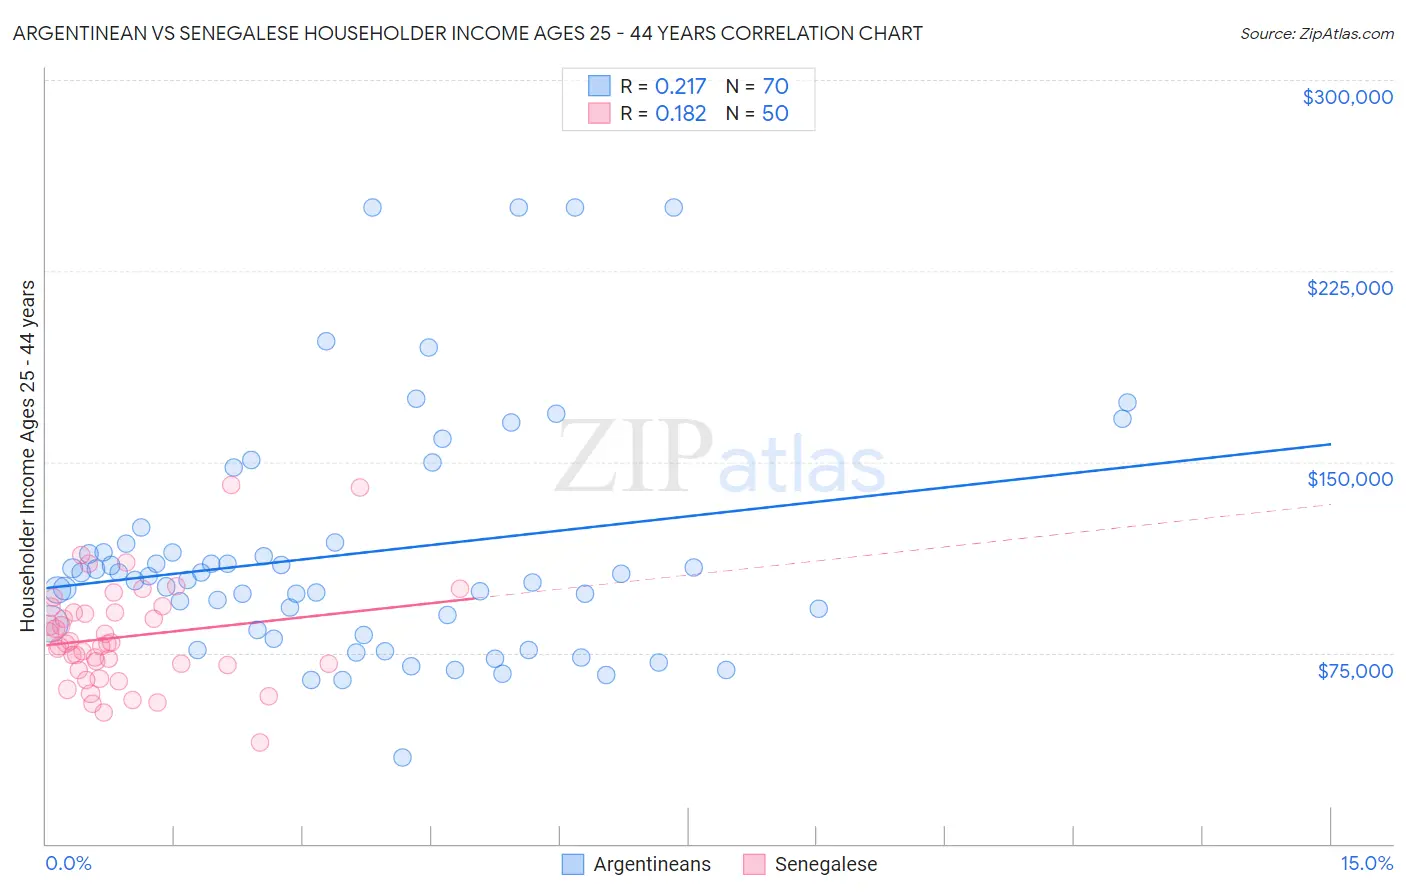 Argentinean vs Senegalese Householder Income Ages 25 - 44 years